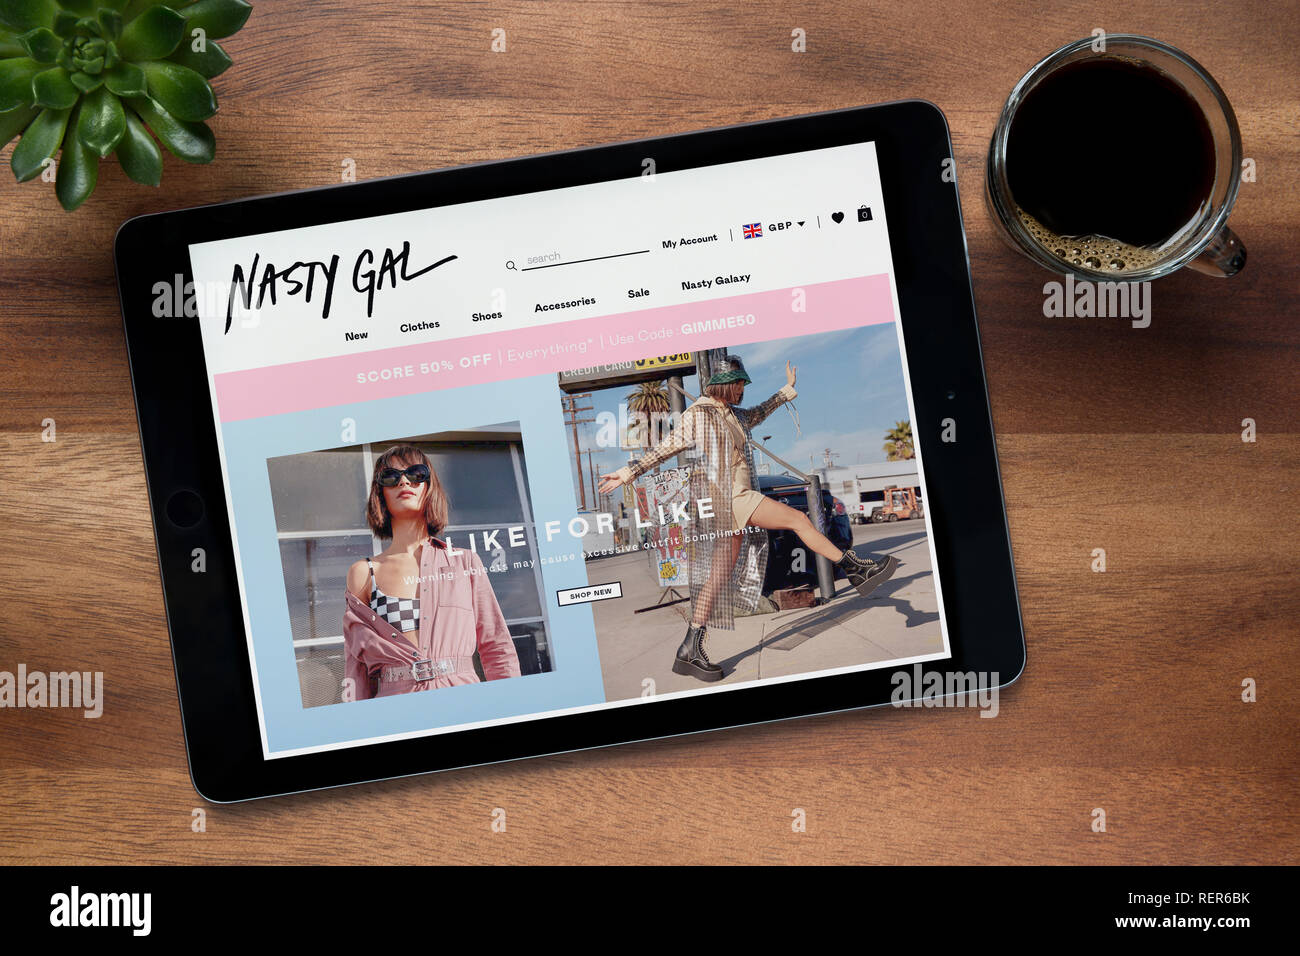 The website of Nasty Gal is seen on an iPad tablet, on a wooden table along with an espresso coffee and a house plant (Editorial use only). Stock Photo